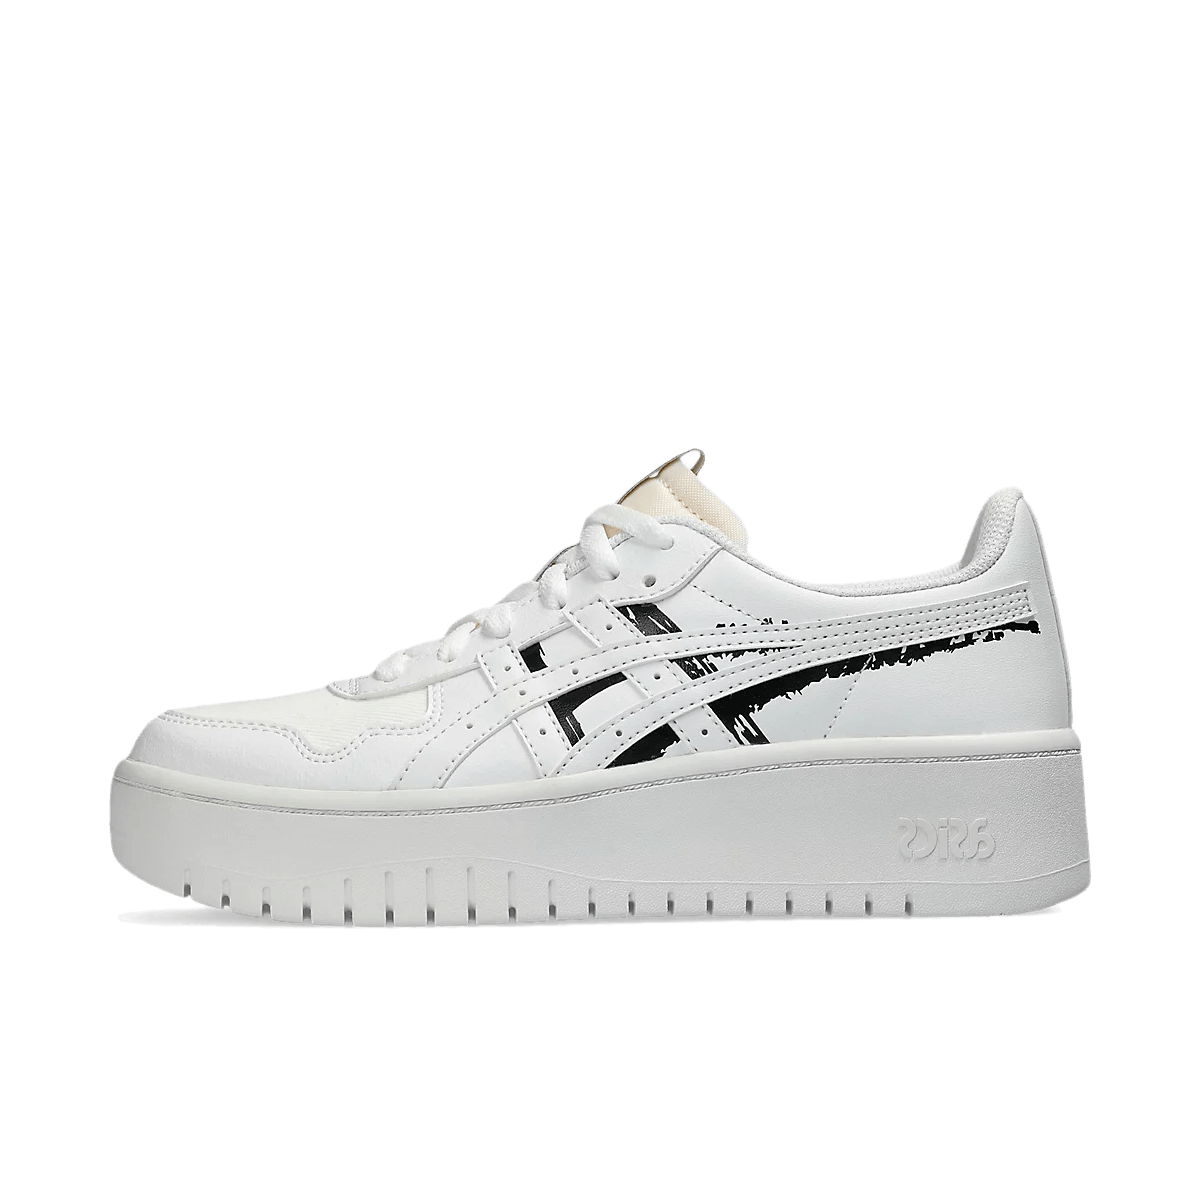 Asics Japan S PF WMNS 'White' - Imperfection Pack 1202A483 100